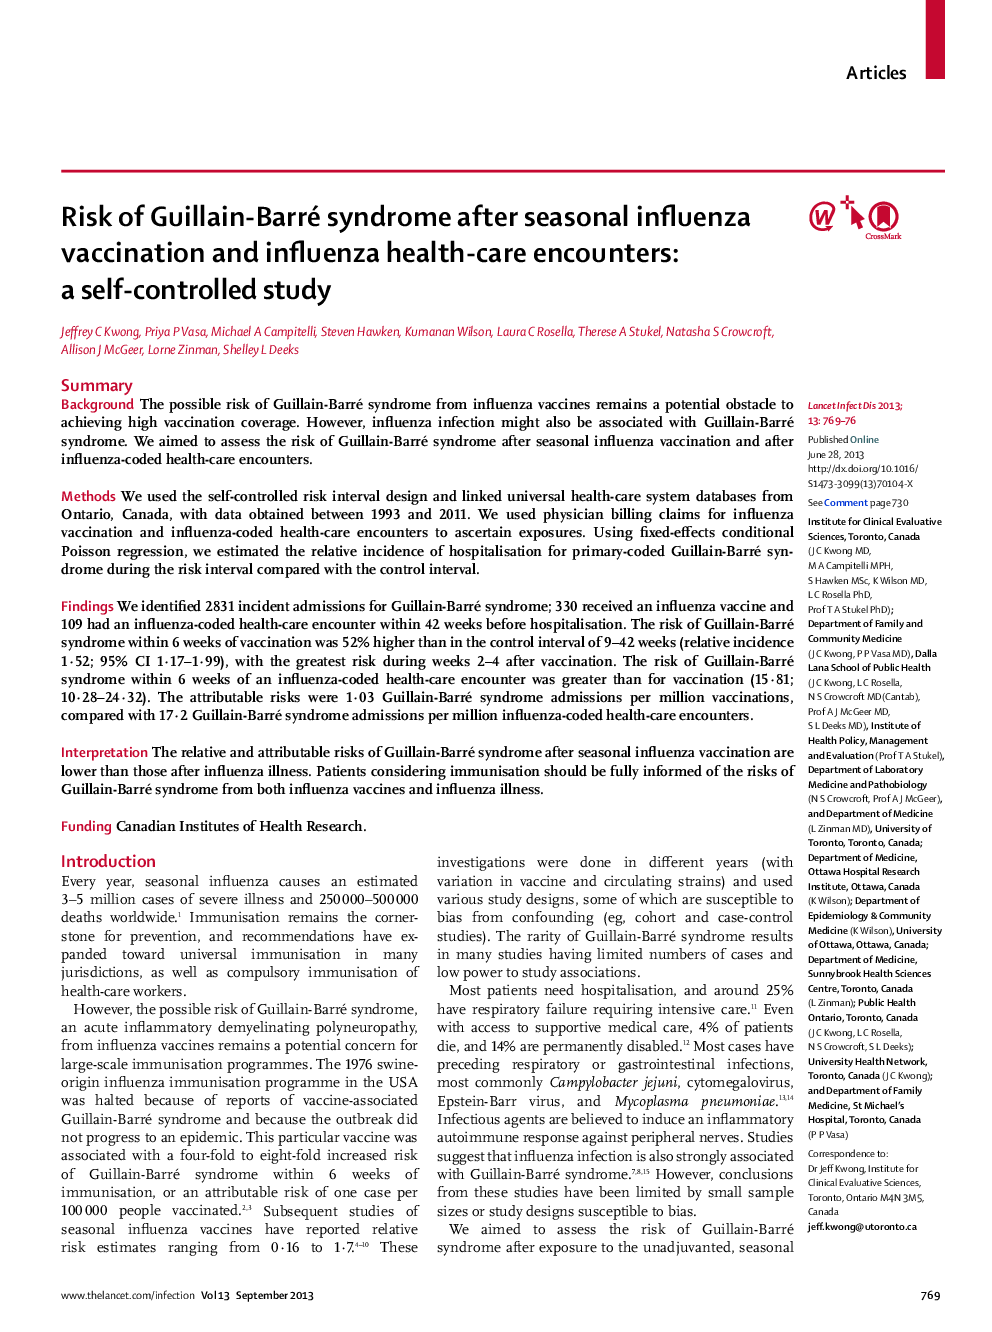 Risk of Guillain-Barré syndrome after seasonal influenza vaccination and influenza health-care encounters: a self-controlled study